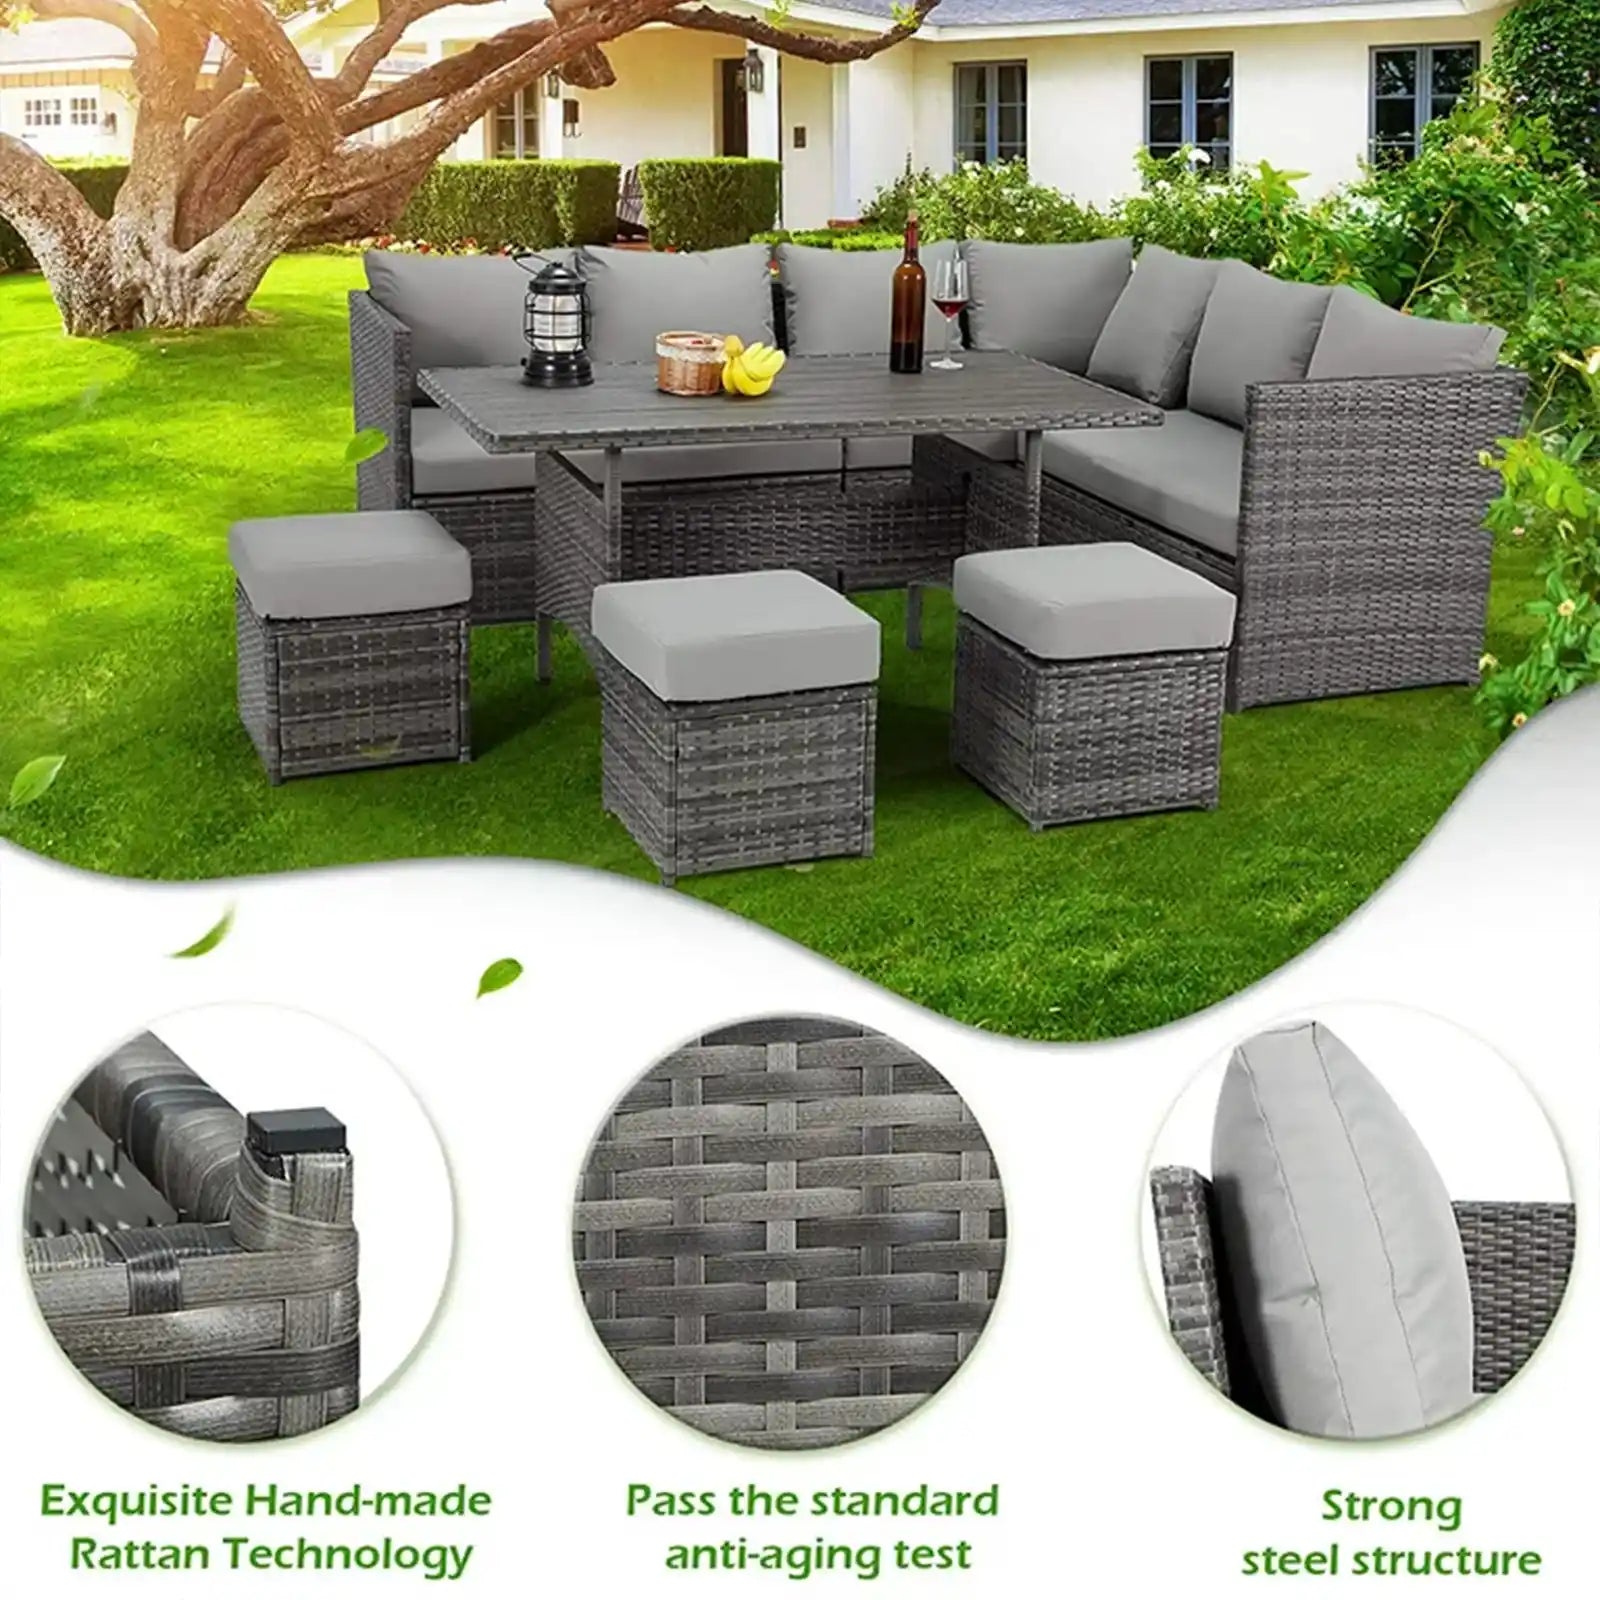 All-Weather Patio Dining Set with Protective Cover | Sturdy PE Rattan | High-Quality Cushions | Perfect for Outdoor Gatherings in the USA